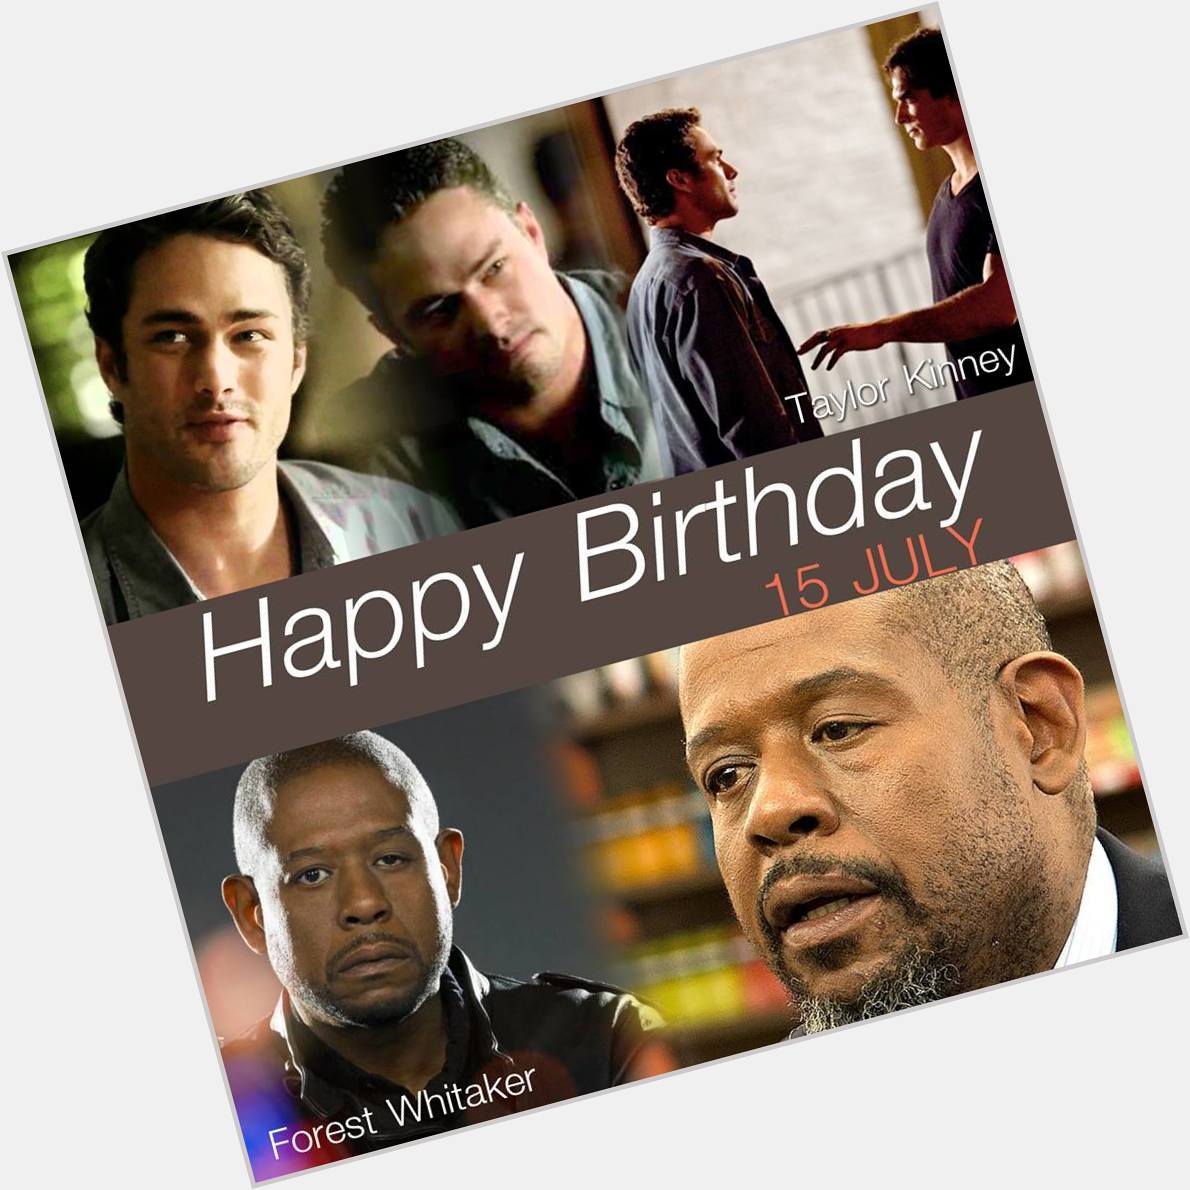 15 July Happy Birthday
- Taylor Kinney (The Vampire Diaries)
- Forest Whitaker 